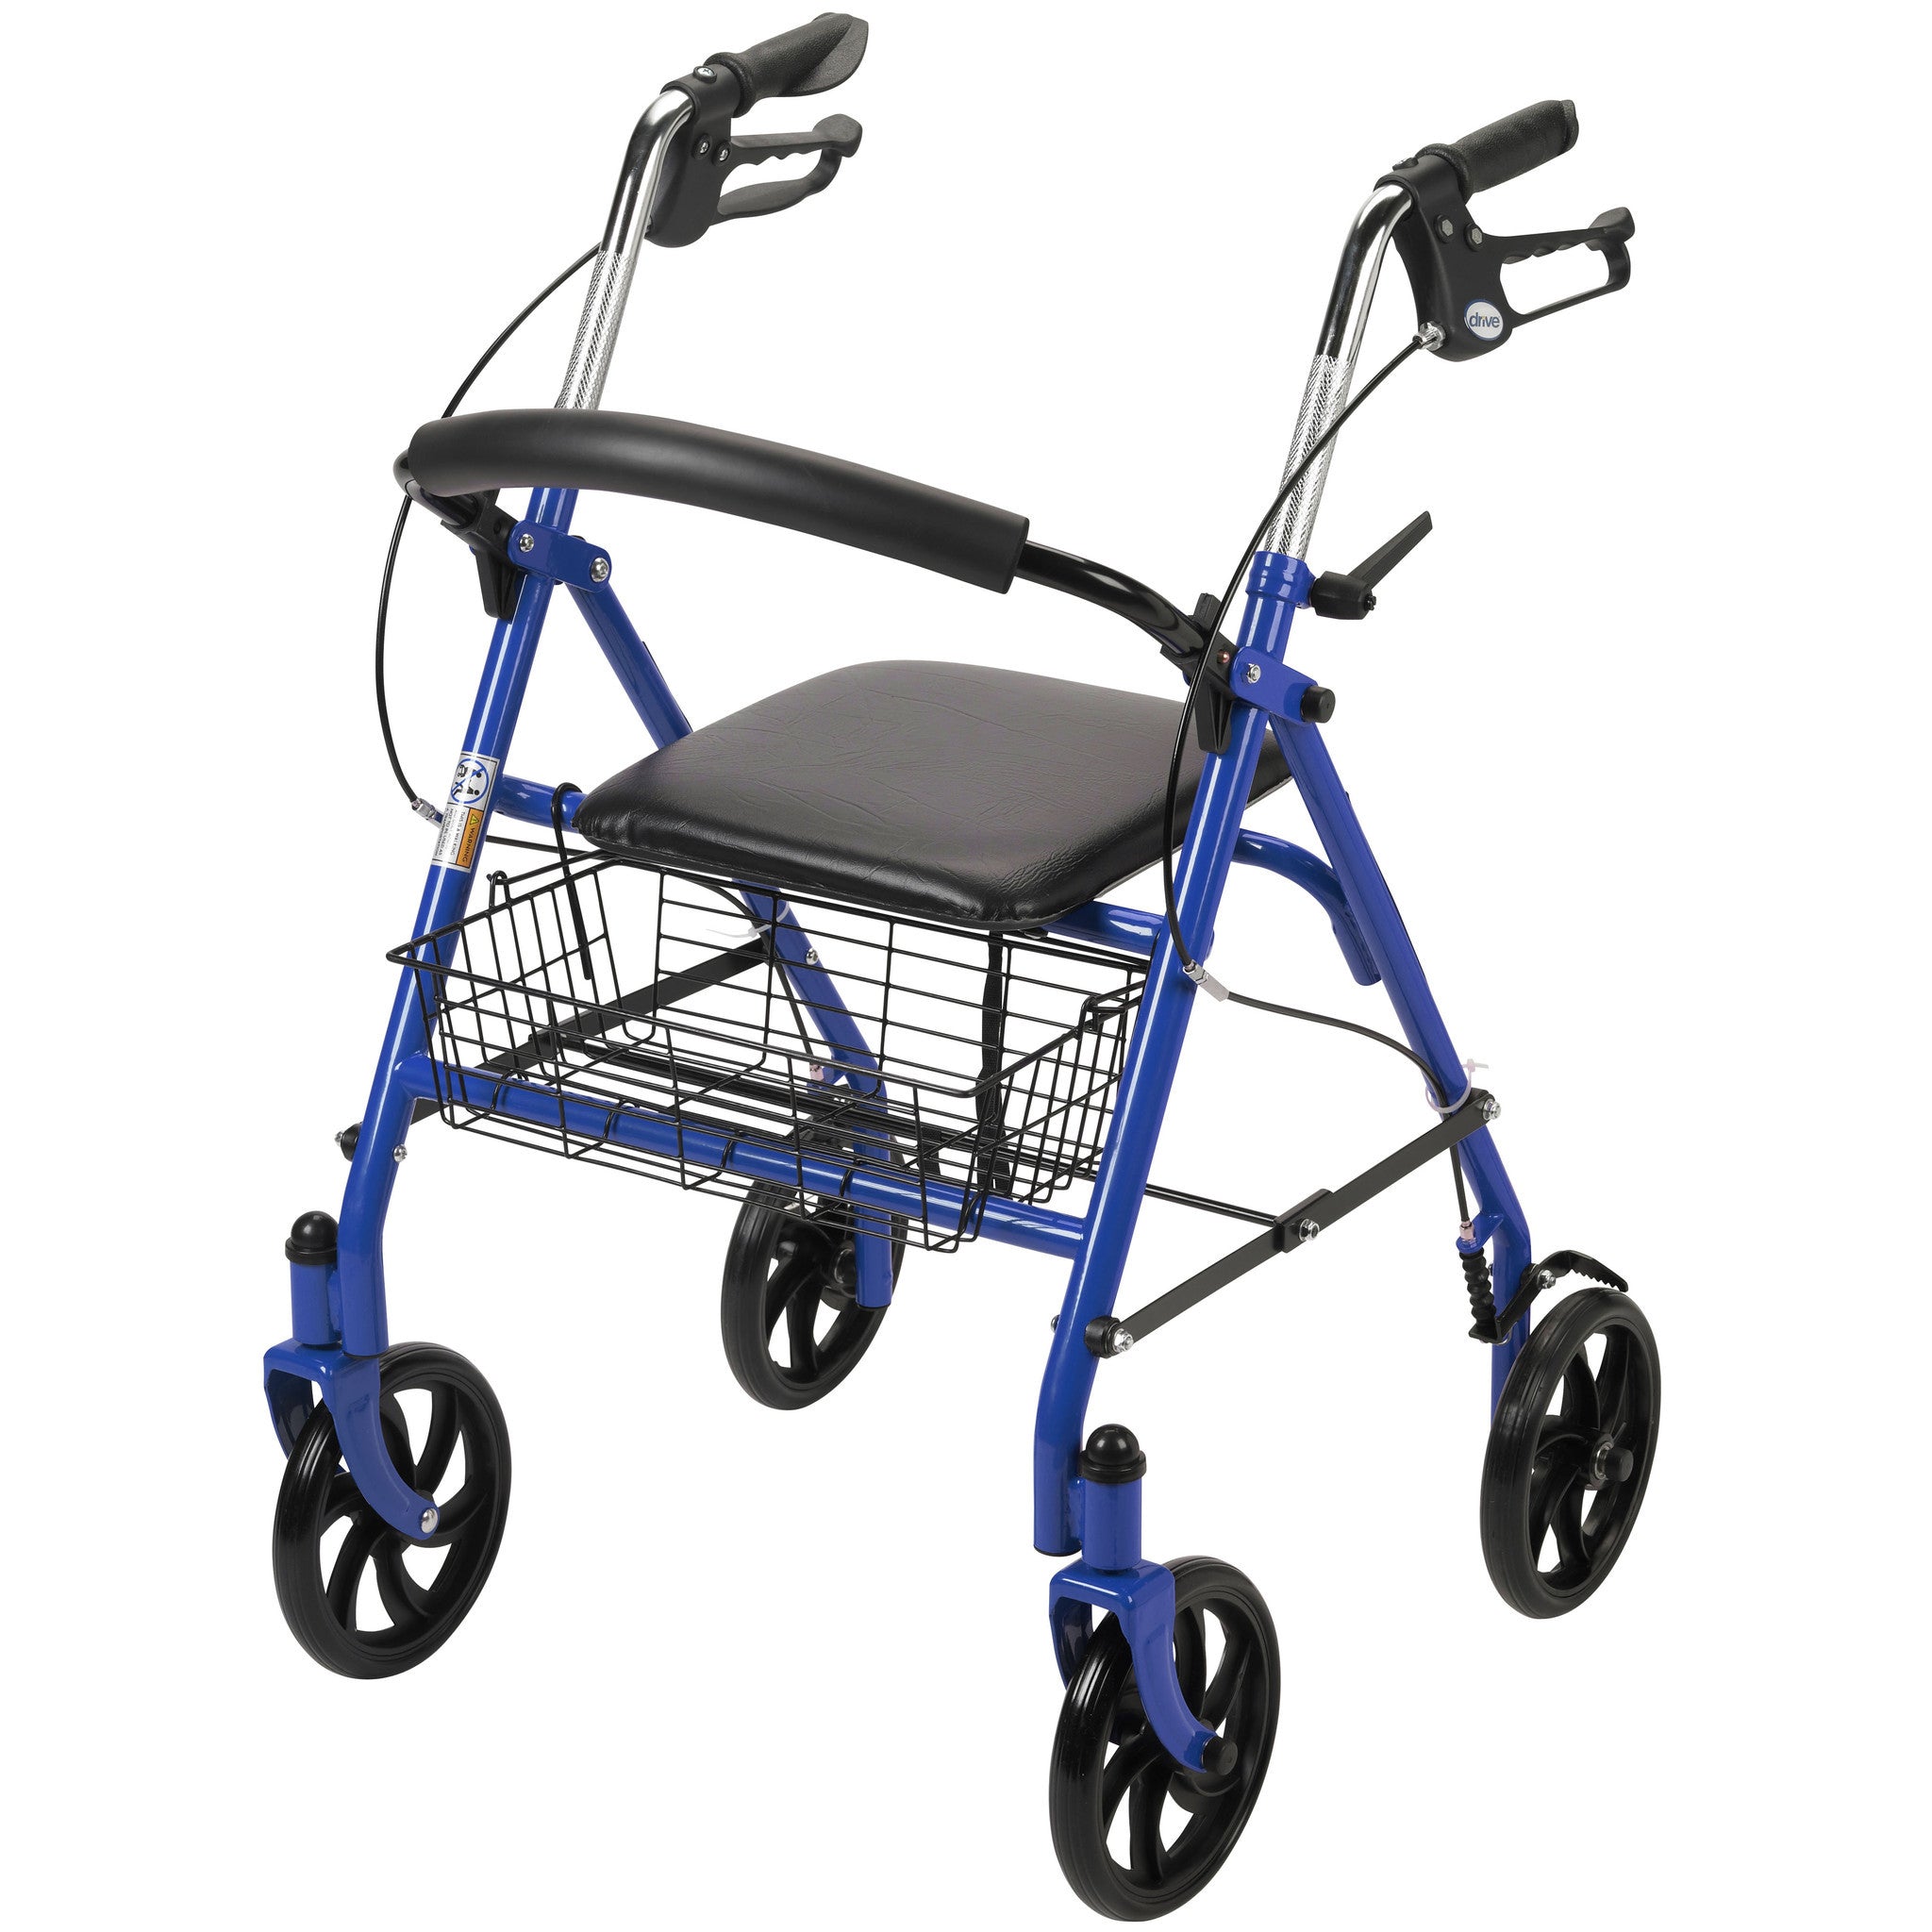 Wheel Walker Rollator with Fold Removable Back Support, Blue – Professional Medical